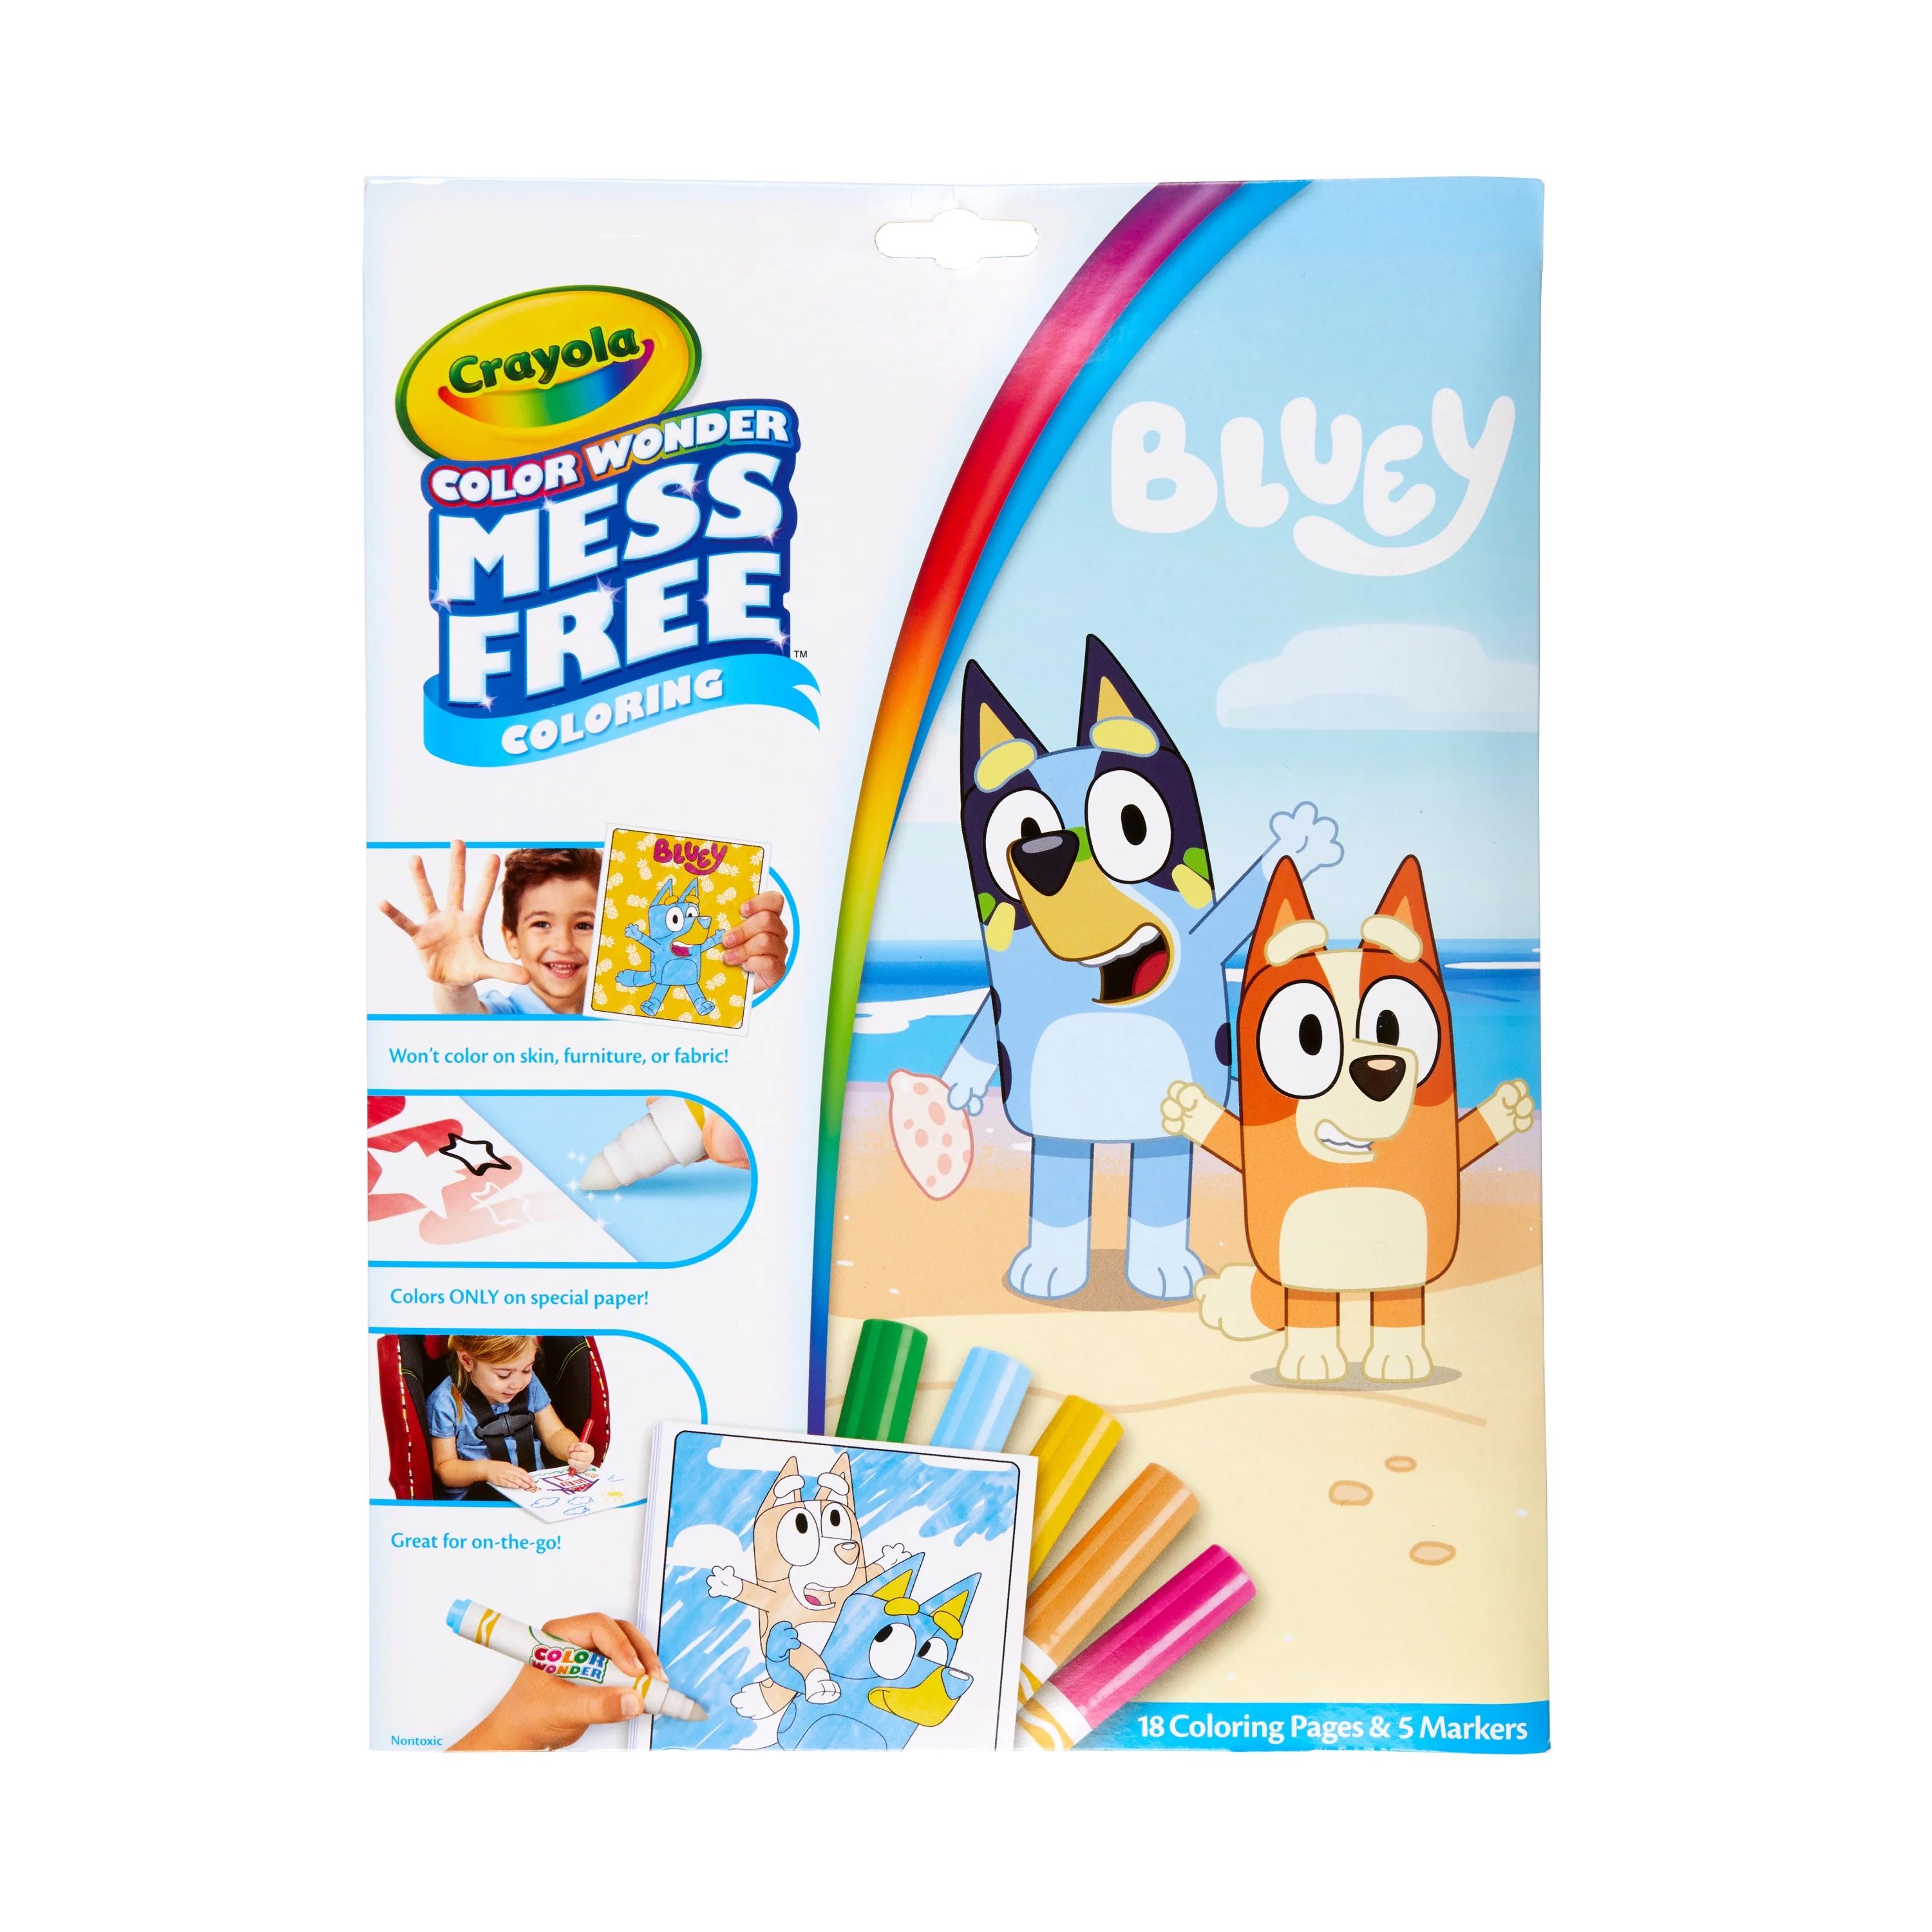 Crayola Color Wonder Mess Free Bluey Coloring Set, 18 pages, Toddler Stocking Stuffers, Gifts for... | Walmart (US)